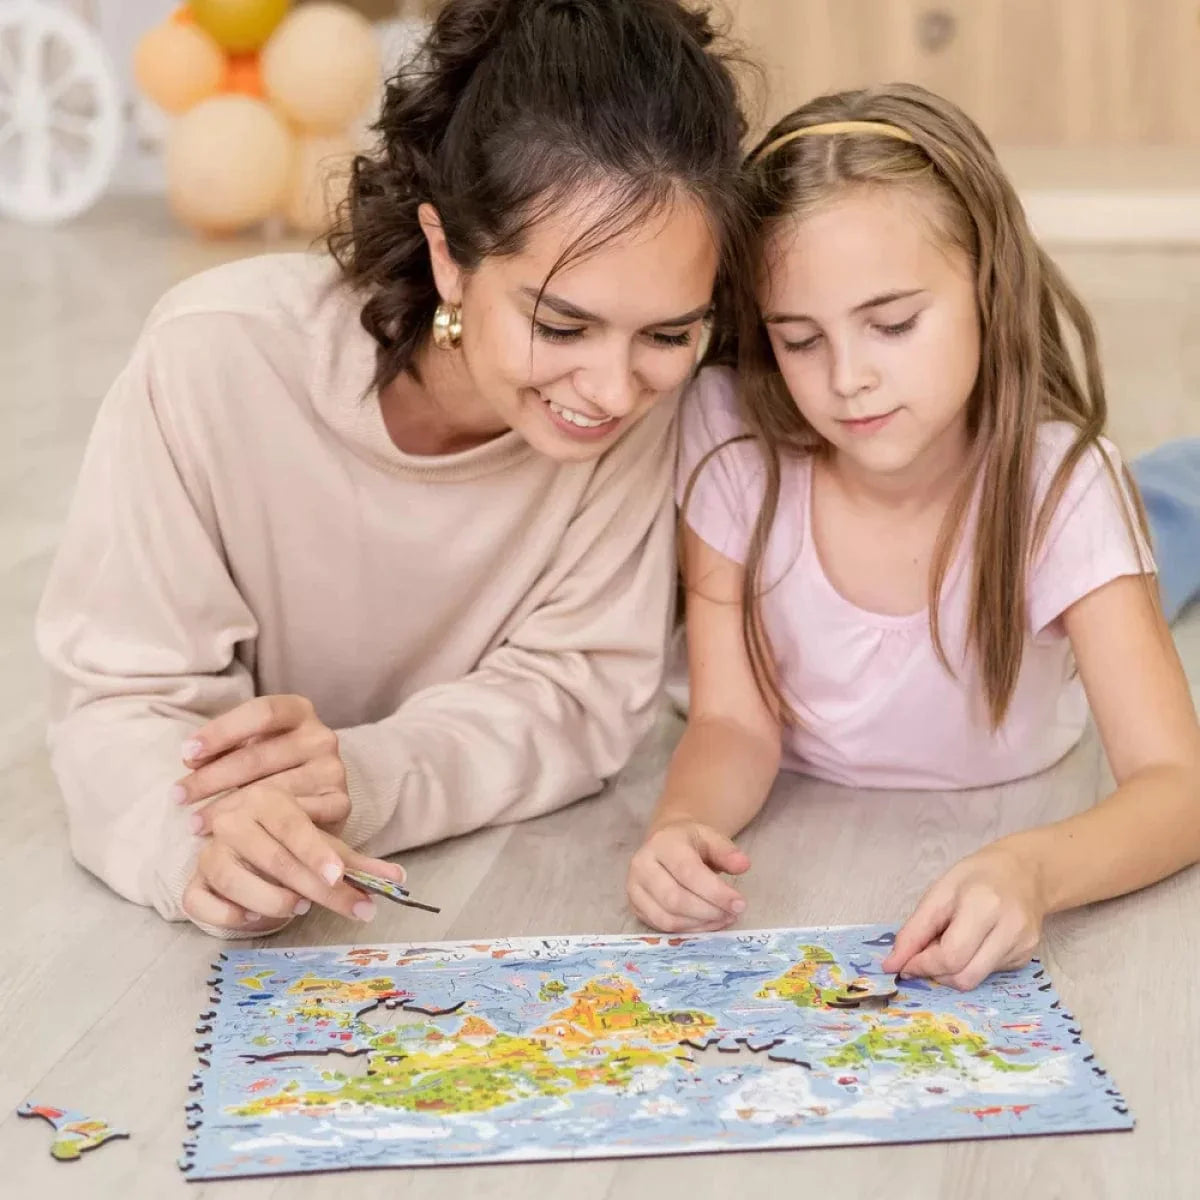 Kids World Map Wooden Puzzle - 100 Pieces